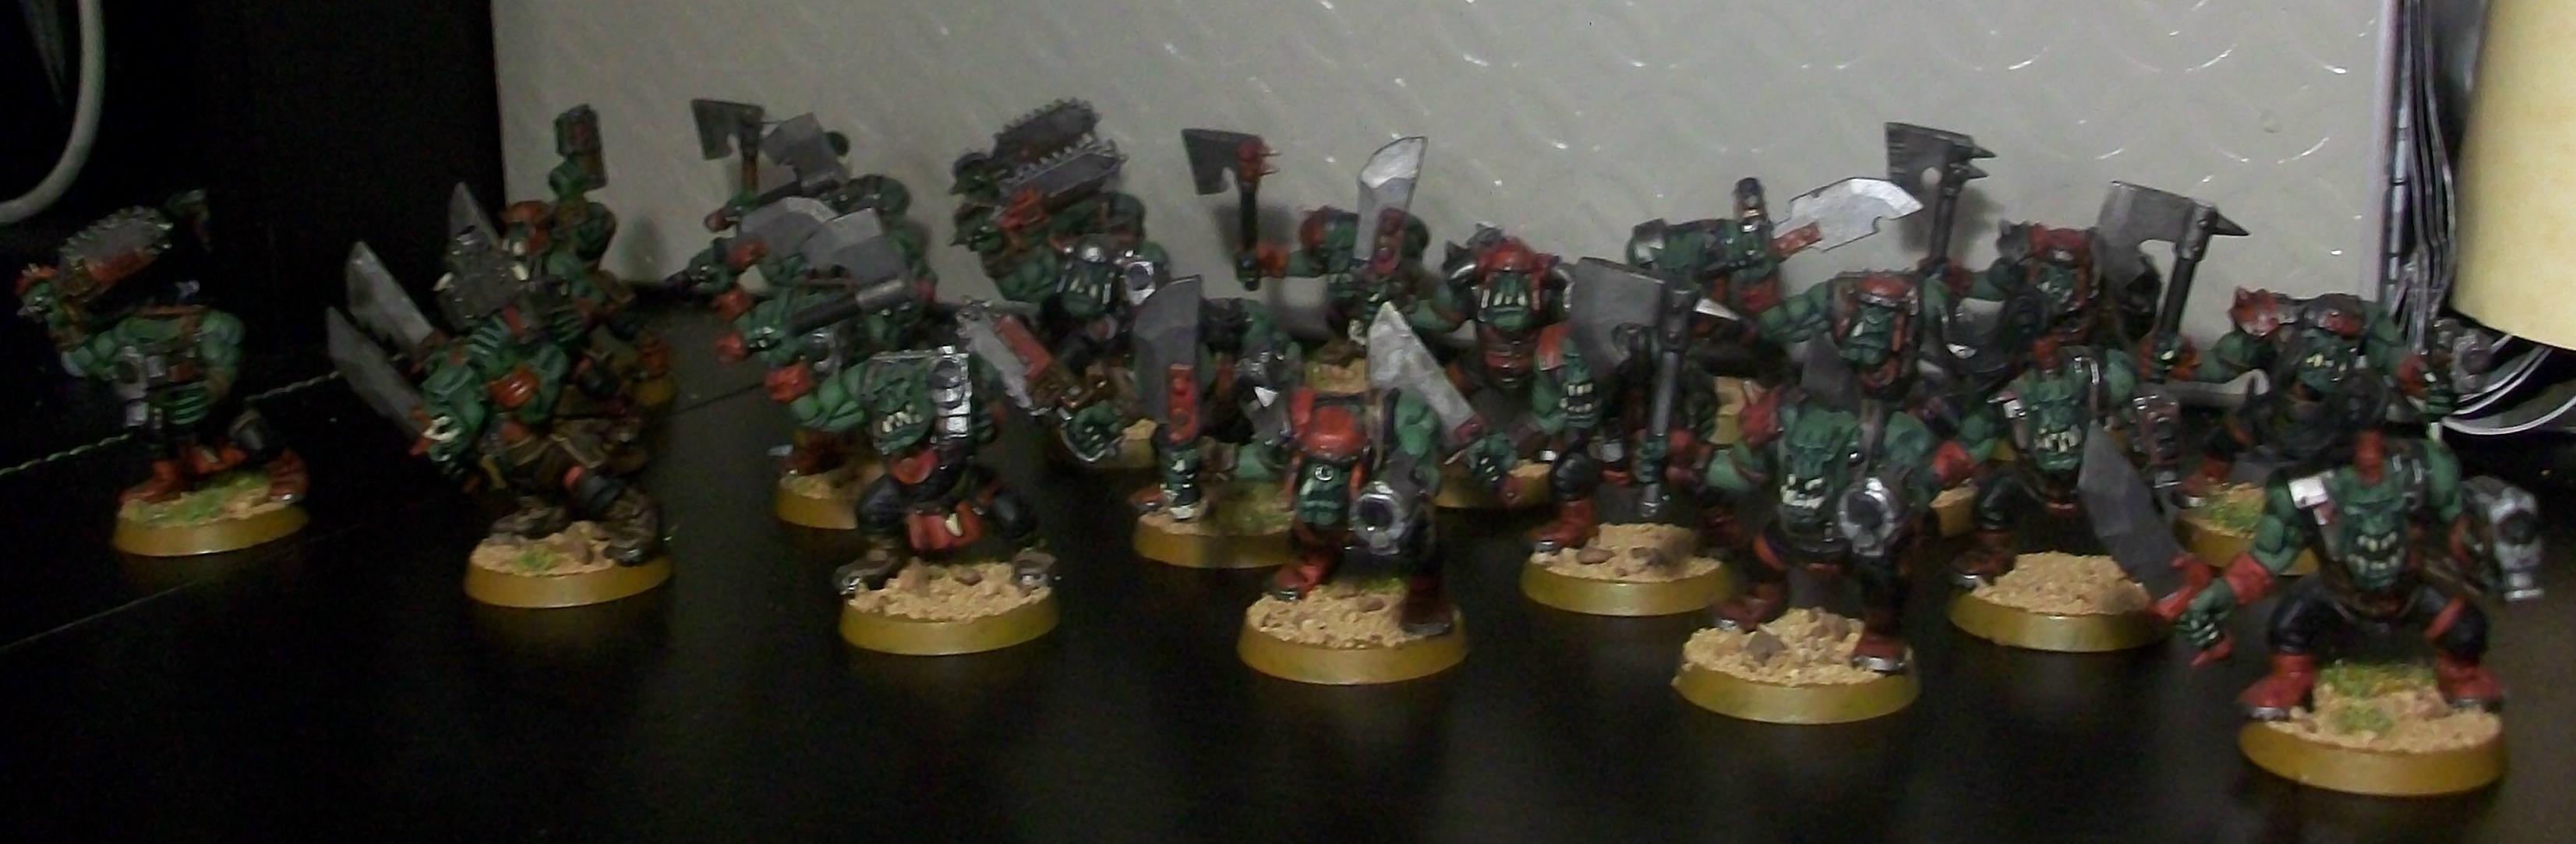 Based, Fully Painted, Mob, Orks, Warhammer 40,000